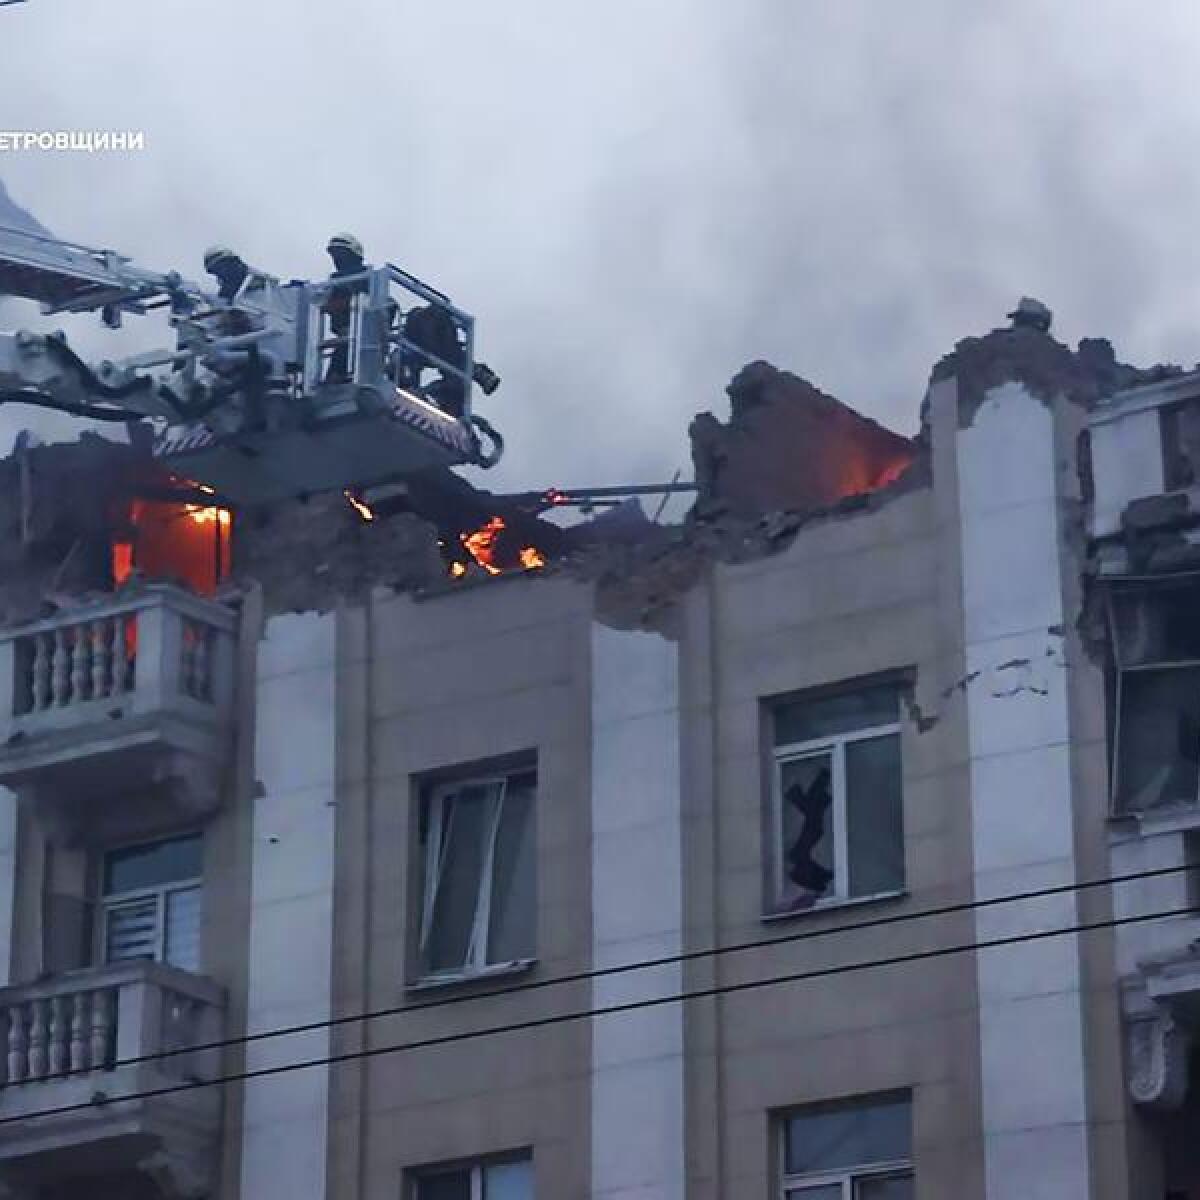 A building damaged after a Russian attack in Dnipro, Ukraine